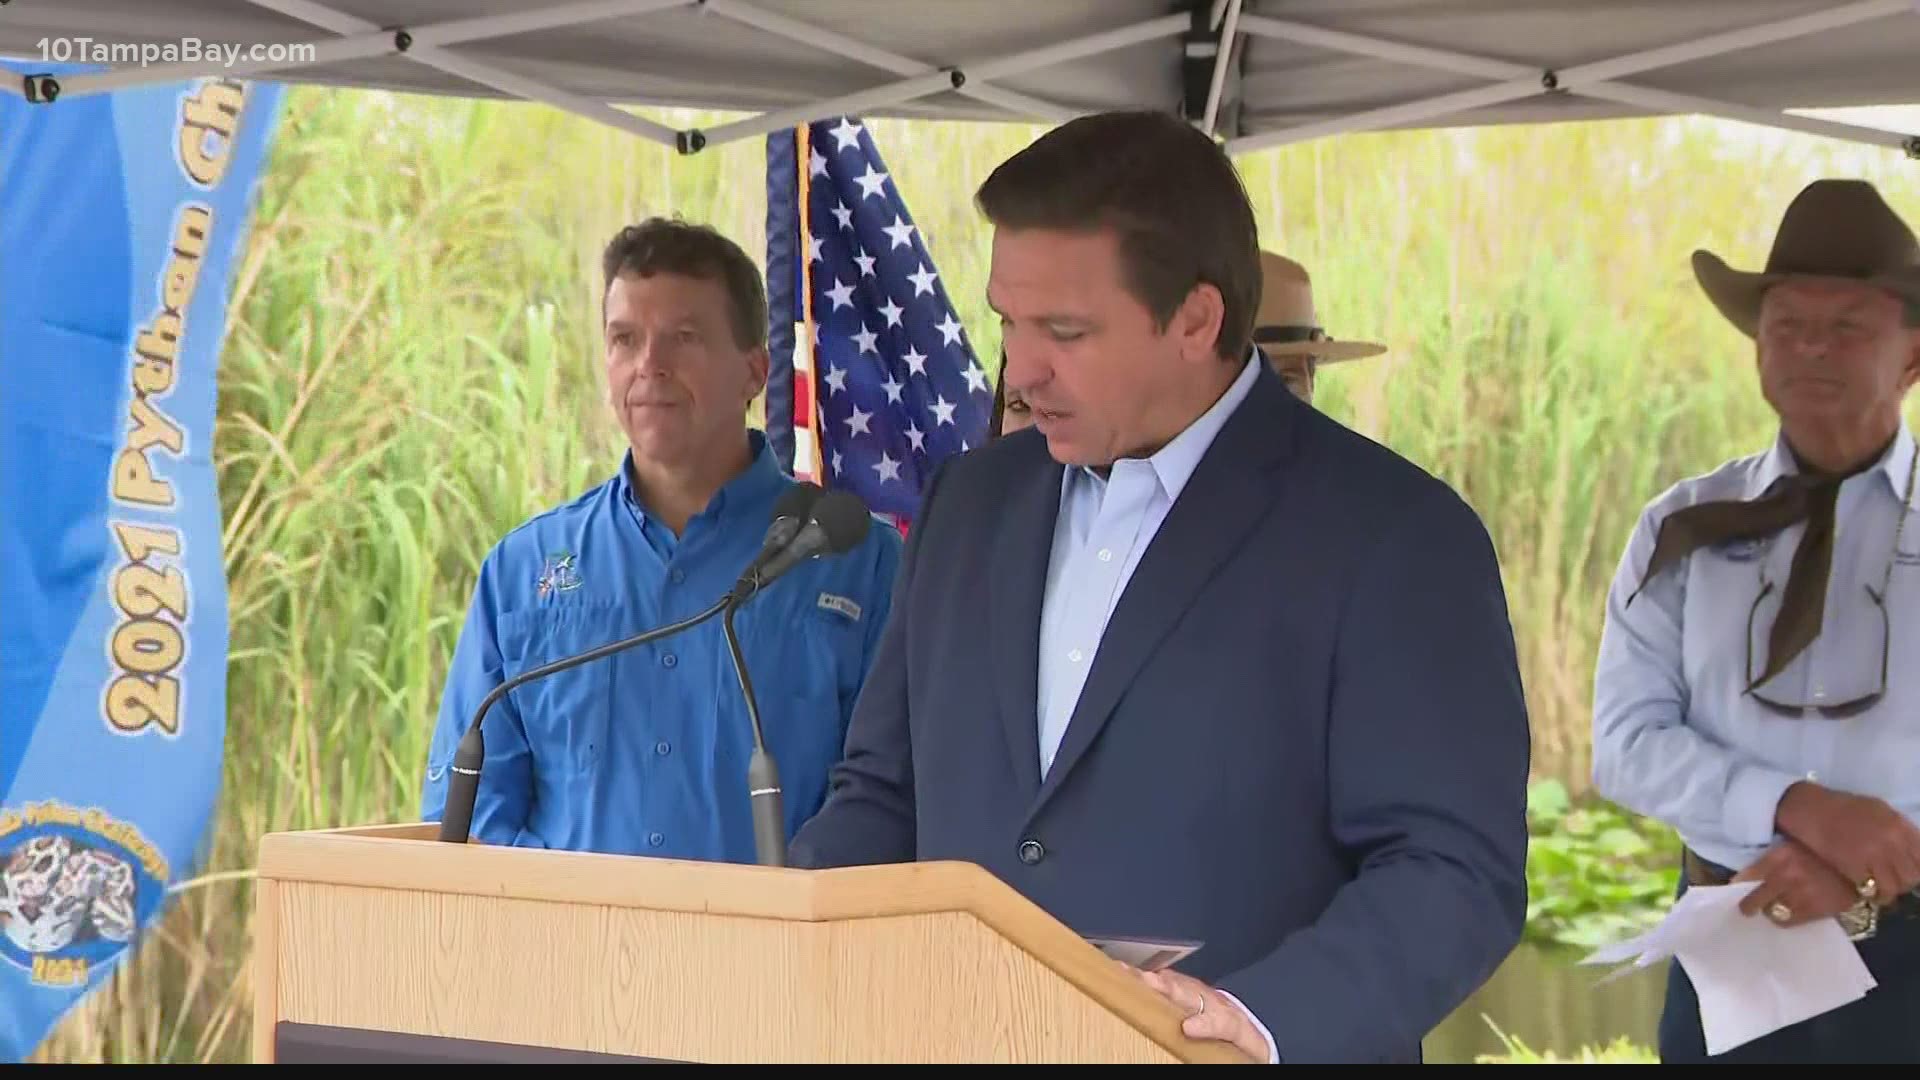 The 2021 Florida Python Challenge is almost here, and Florida Gov. Ron DeSantis made his way down to the Everglades Thursday morning to help get things started.